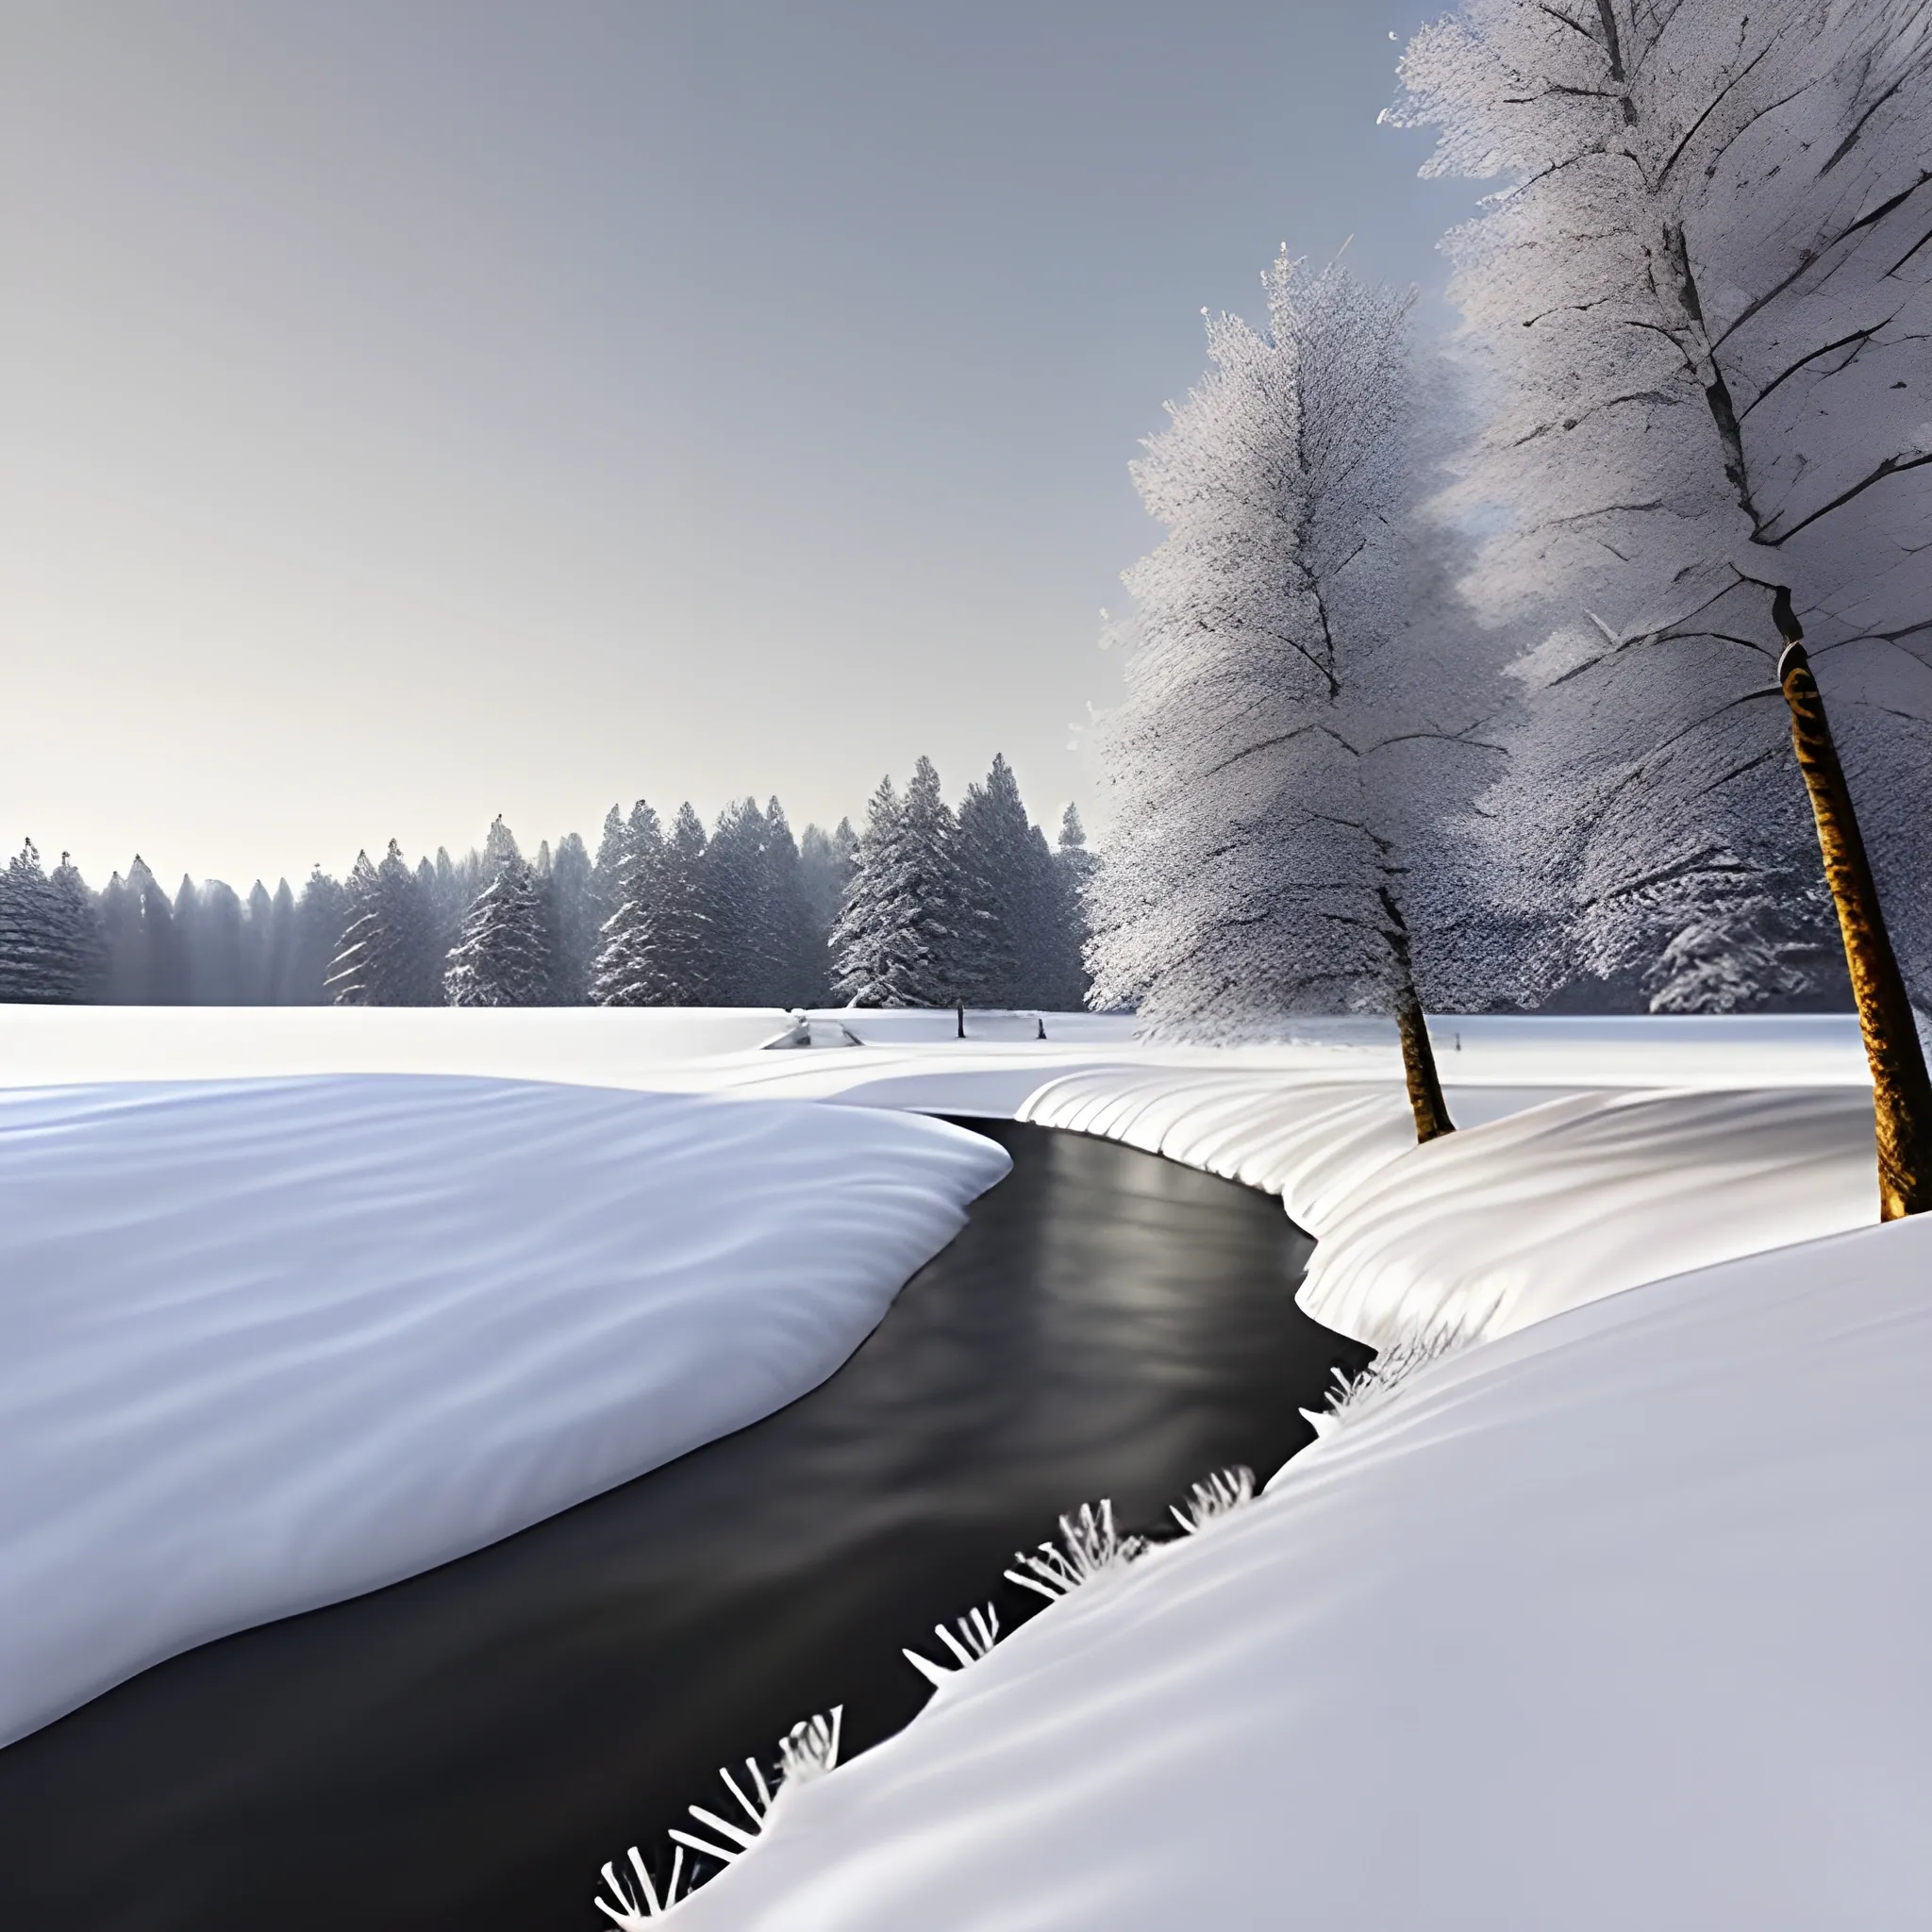 winter scenery, windy falling snow, snowy field with dark trees and a little river or lake in the middle, some white winter flowers, dark theme, sunrays between the trees, 3D